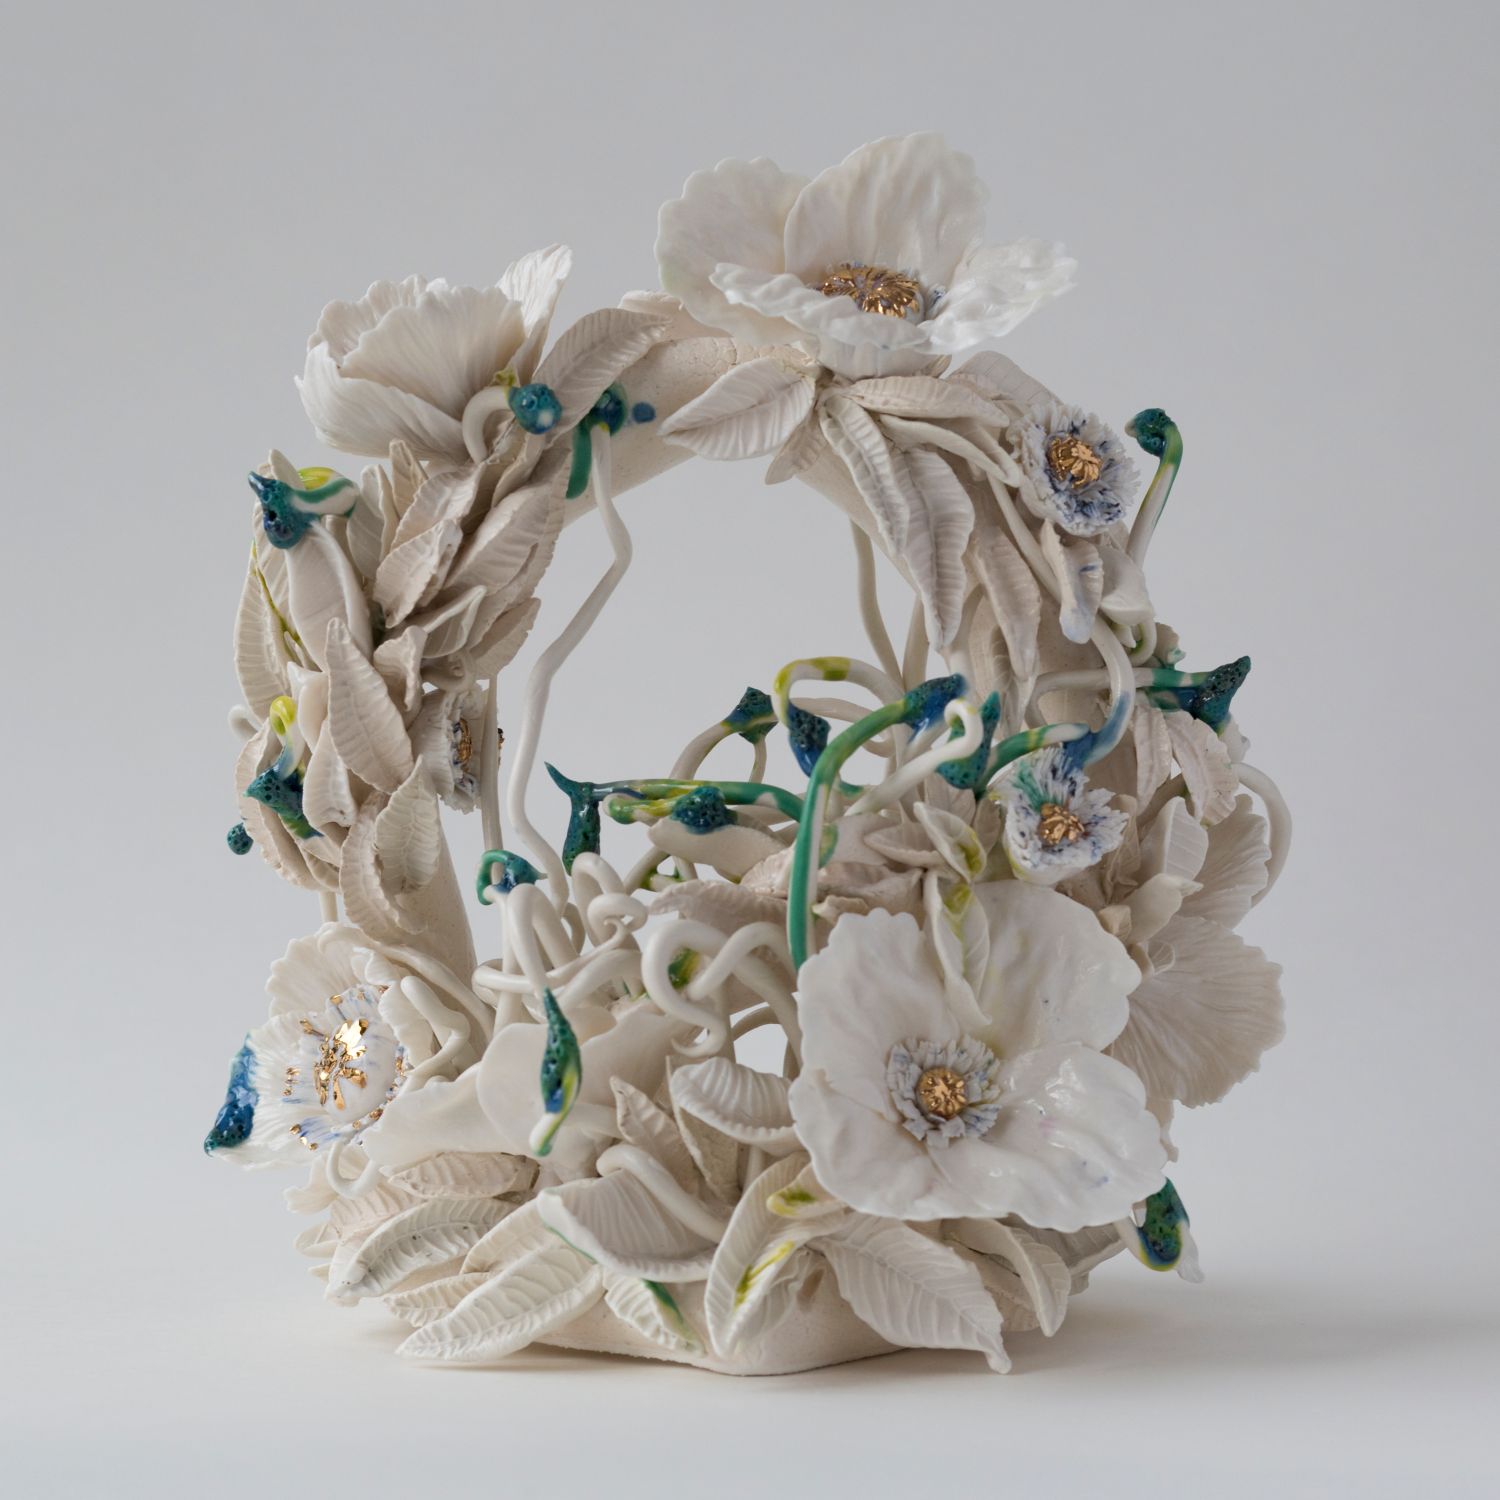 Jess Riva Cooper: Fruiting Bodies and Peonies – Sculpture Product Image 1 of 3